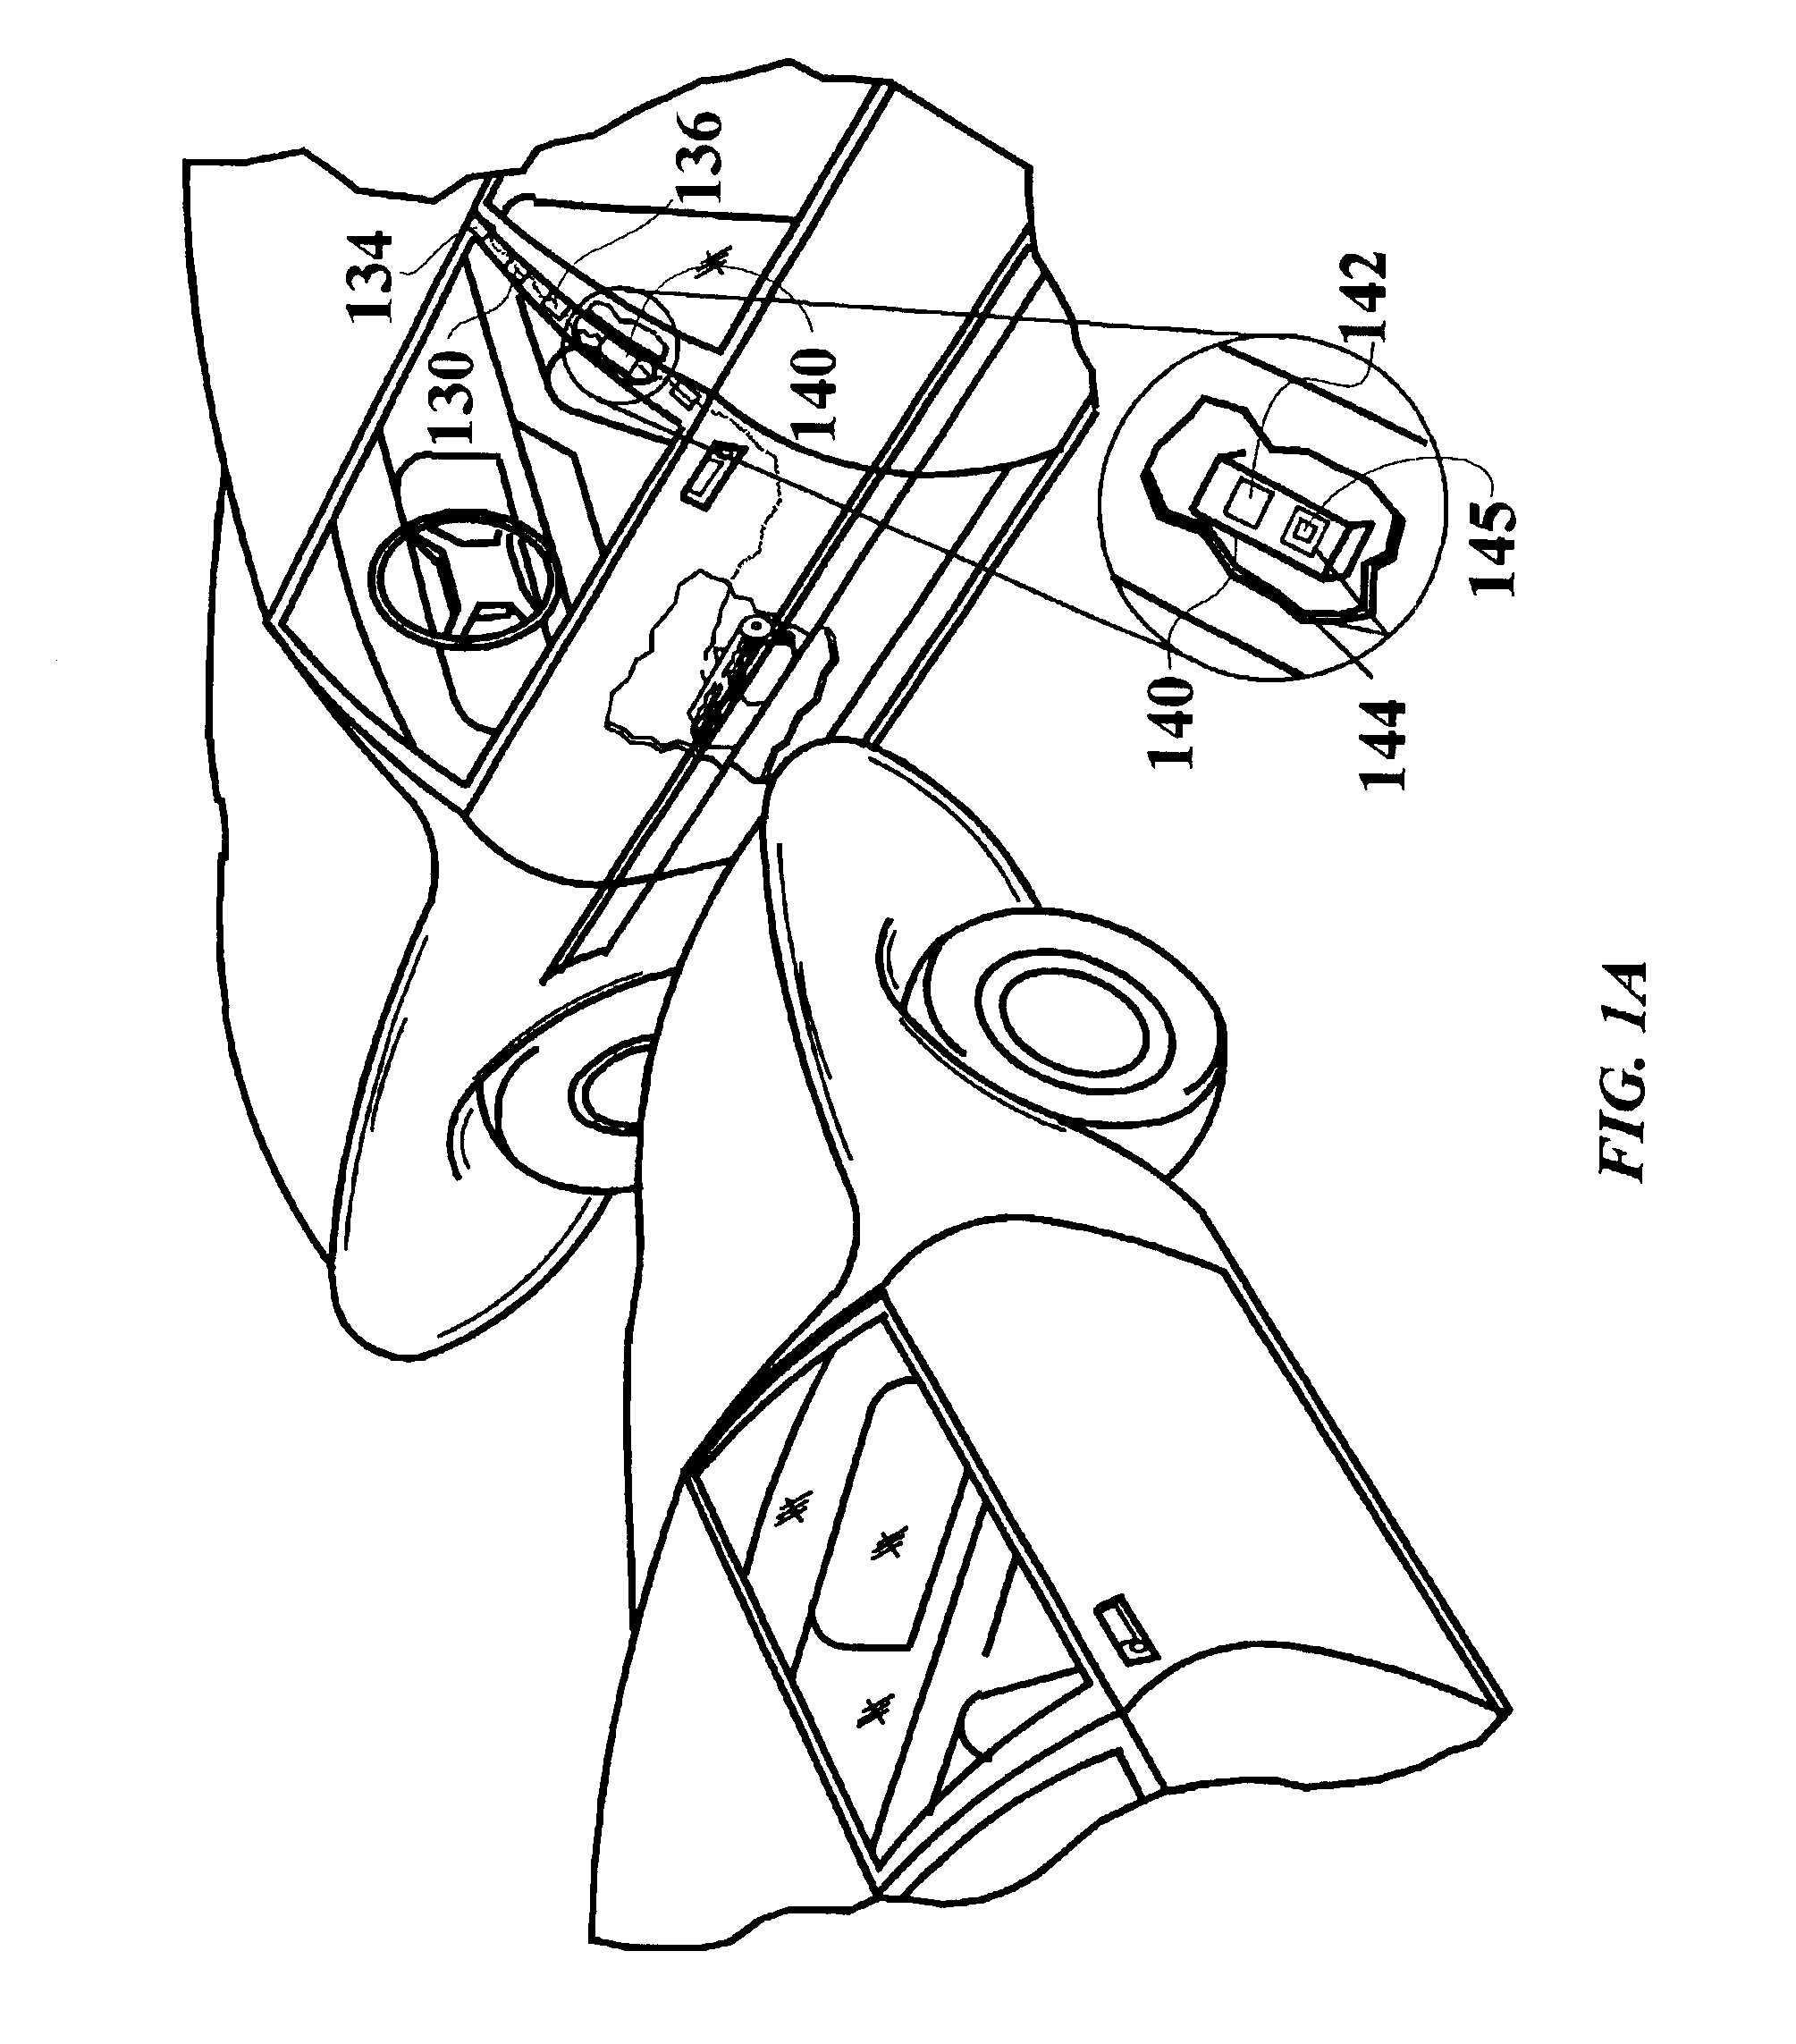 Method and apparatus for deploying airbags